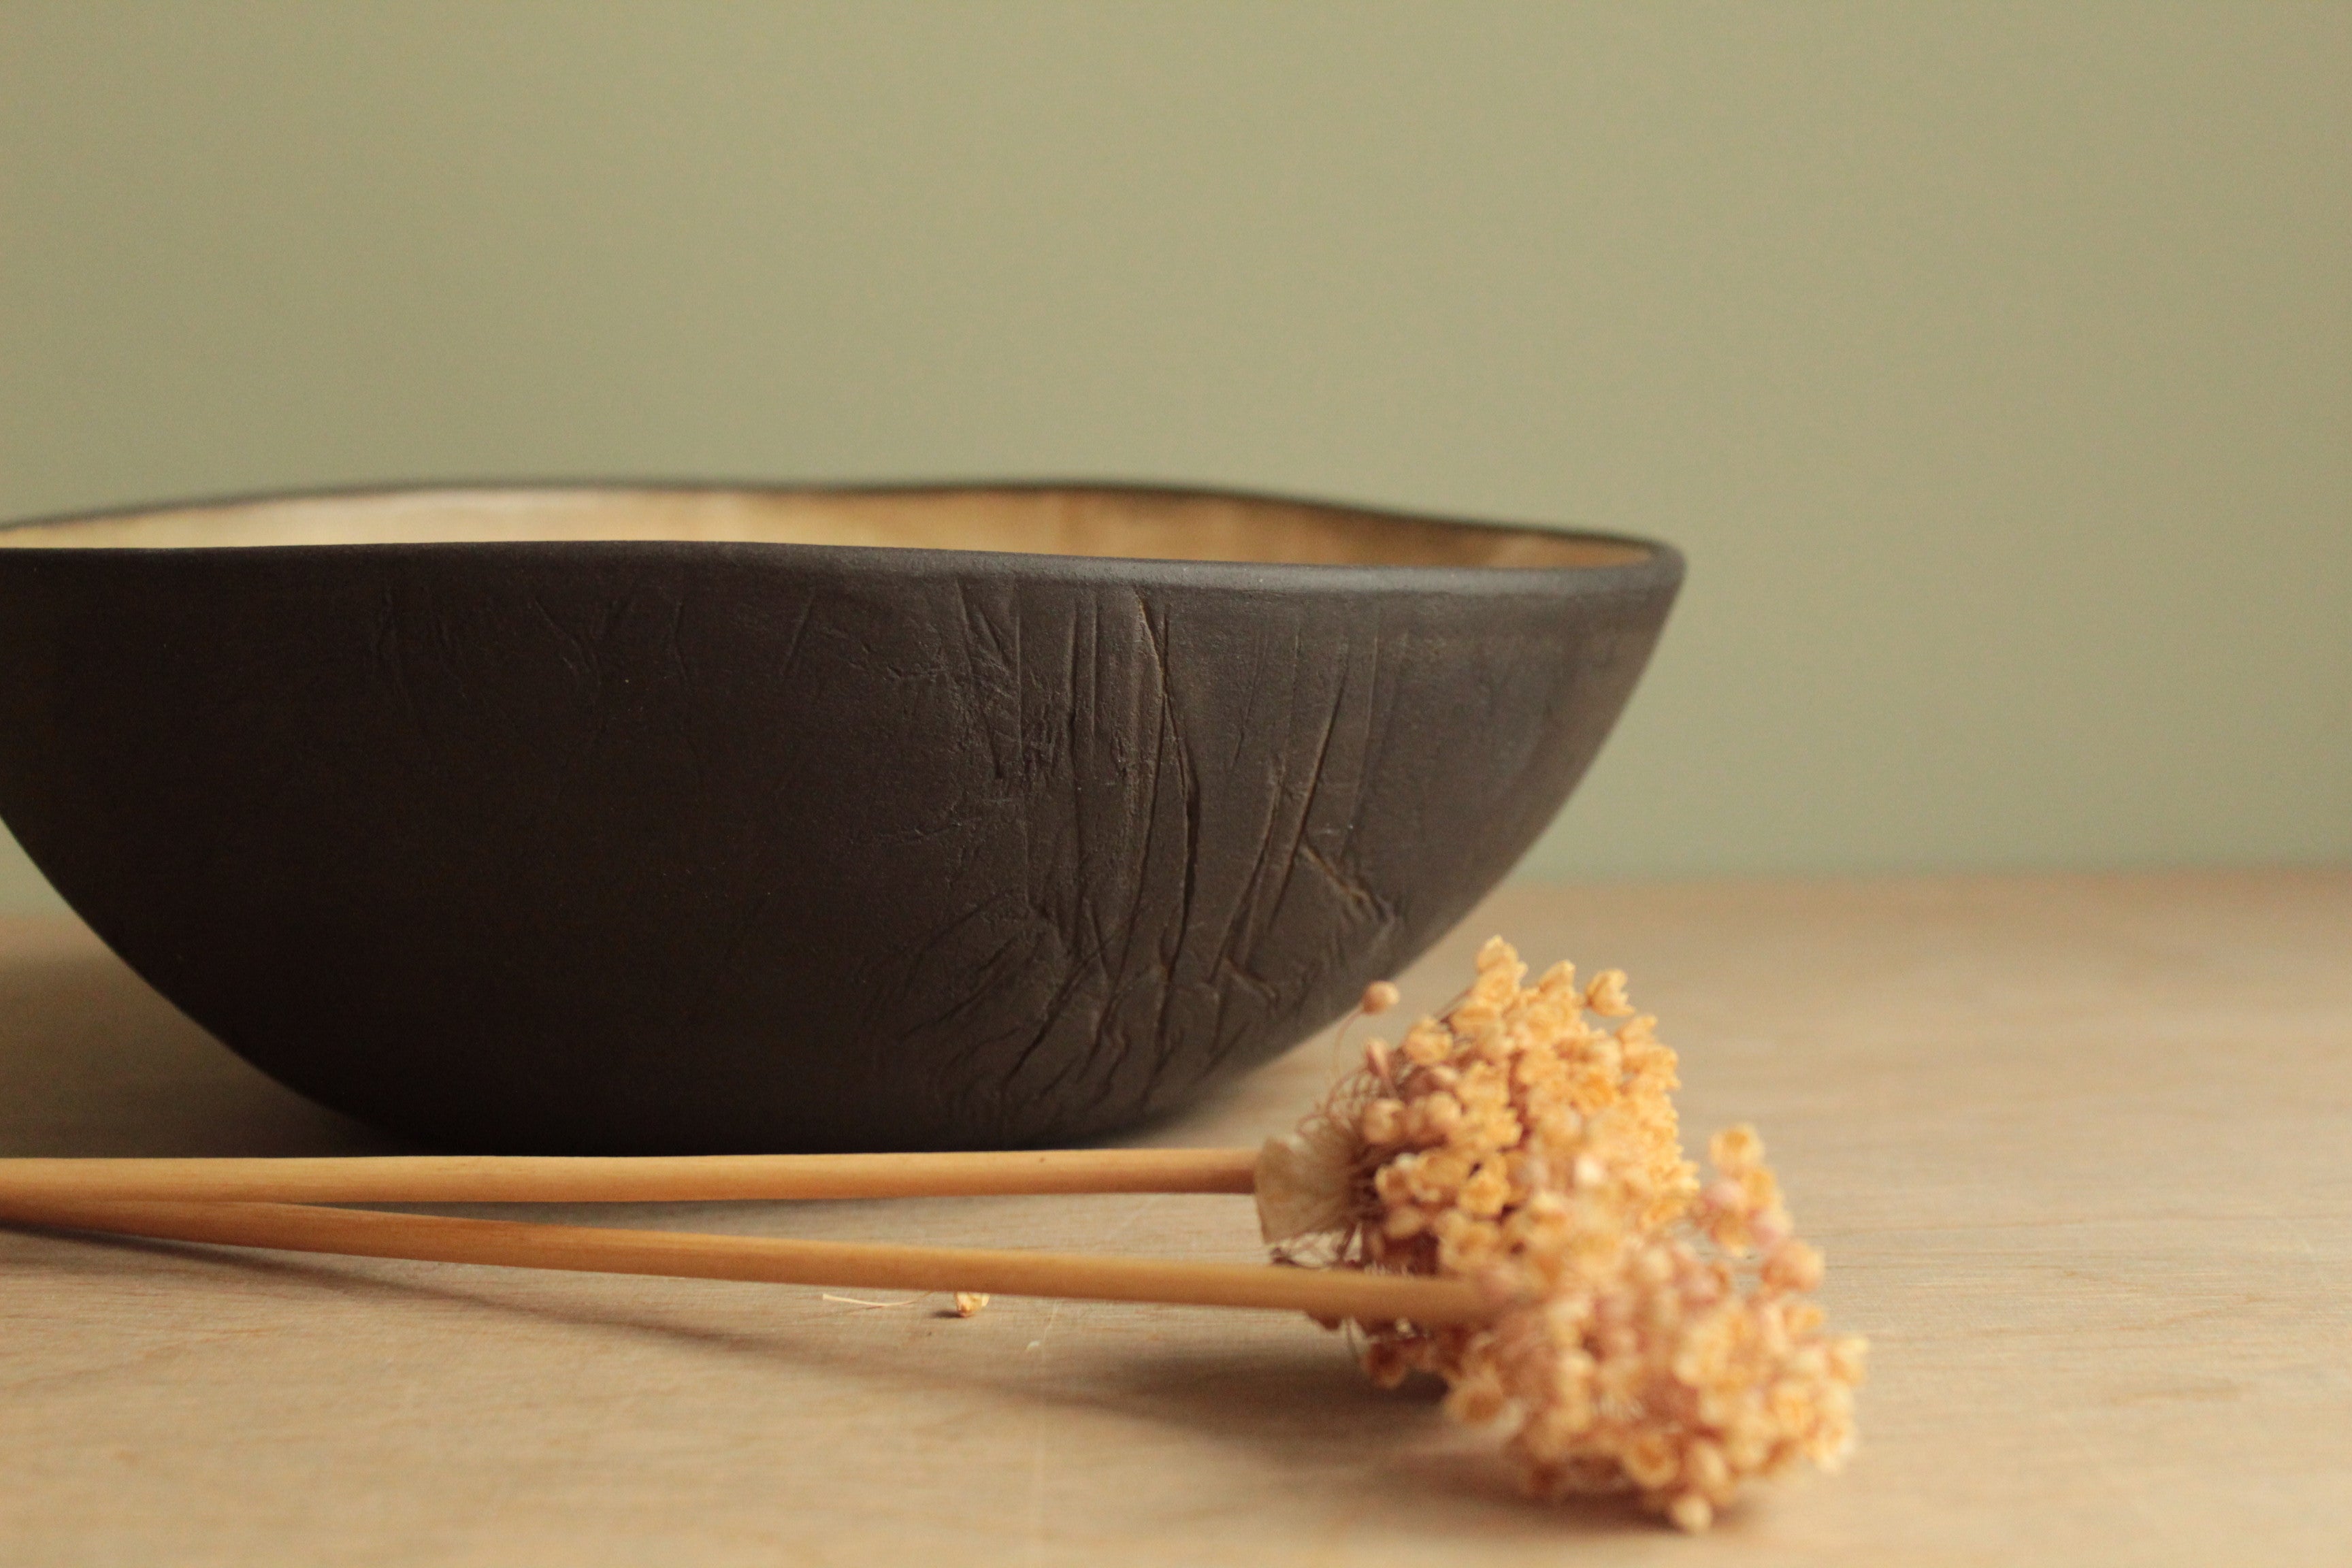 Black/beige serving bowl with texture